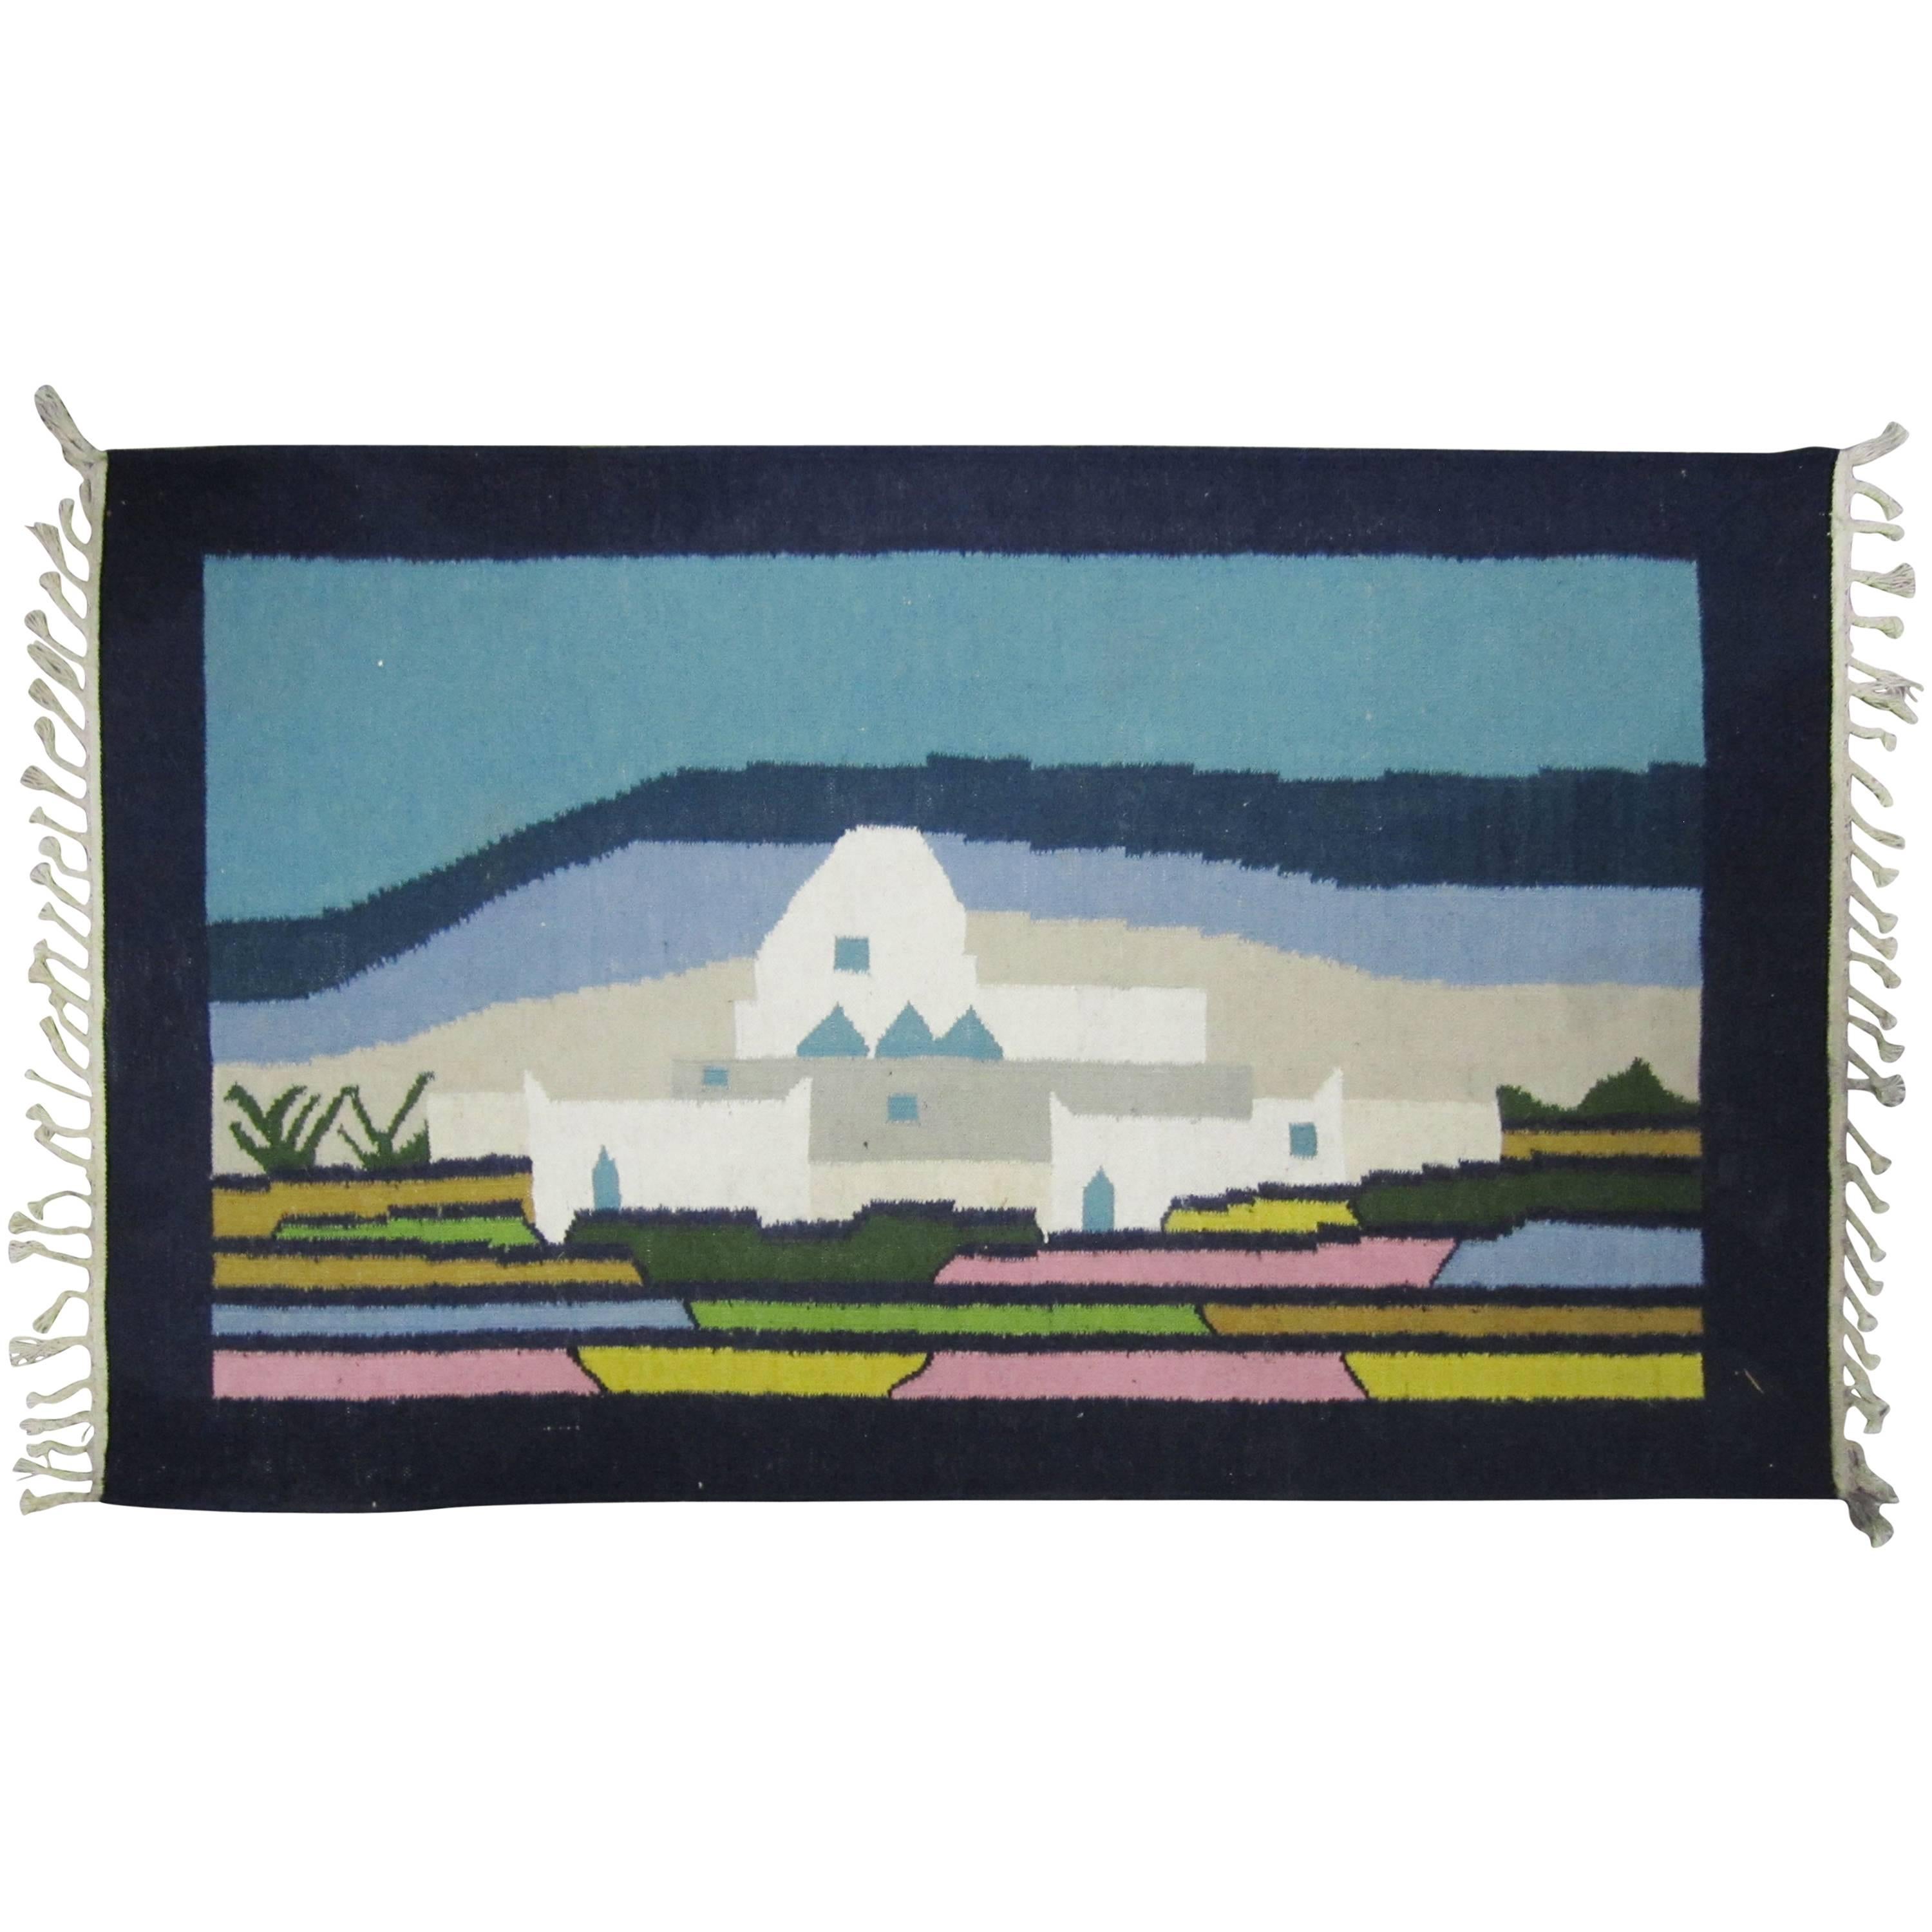 Woven Wool Rug or Tapestry with Mexican Landscape Scene